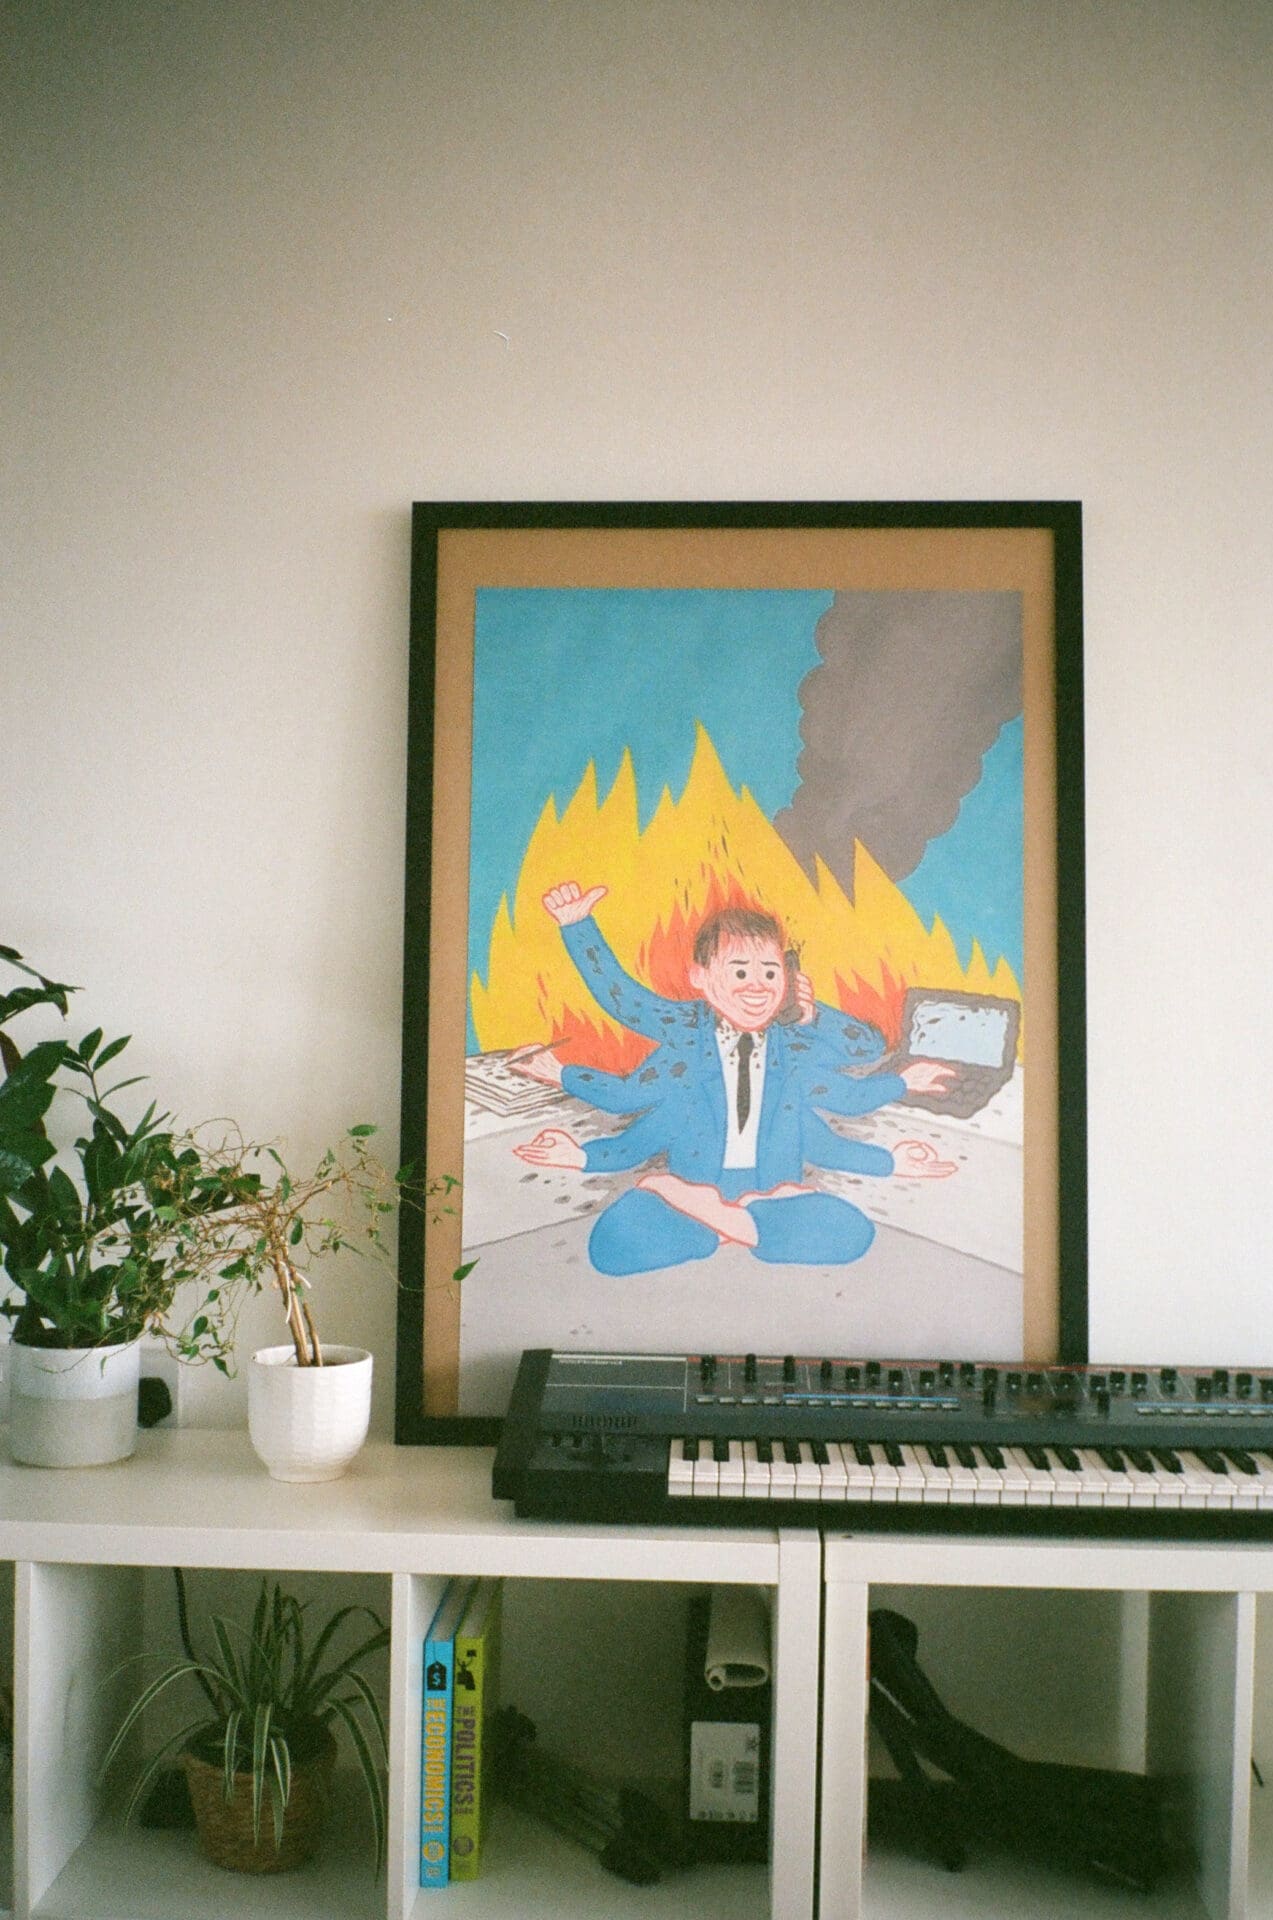 An interview with Thai pop singer Pyra | Inside Pyra's apartment, a Juno synthesiser sits on a white shelving unit, in front of an artwork of a man in a suit on fire with six arms.